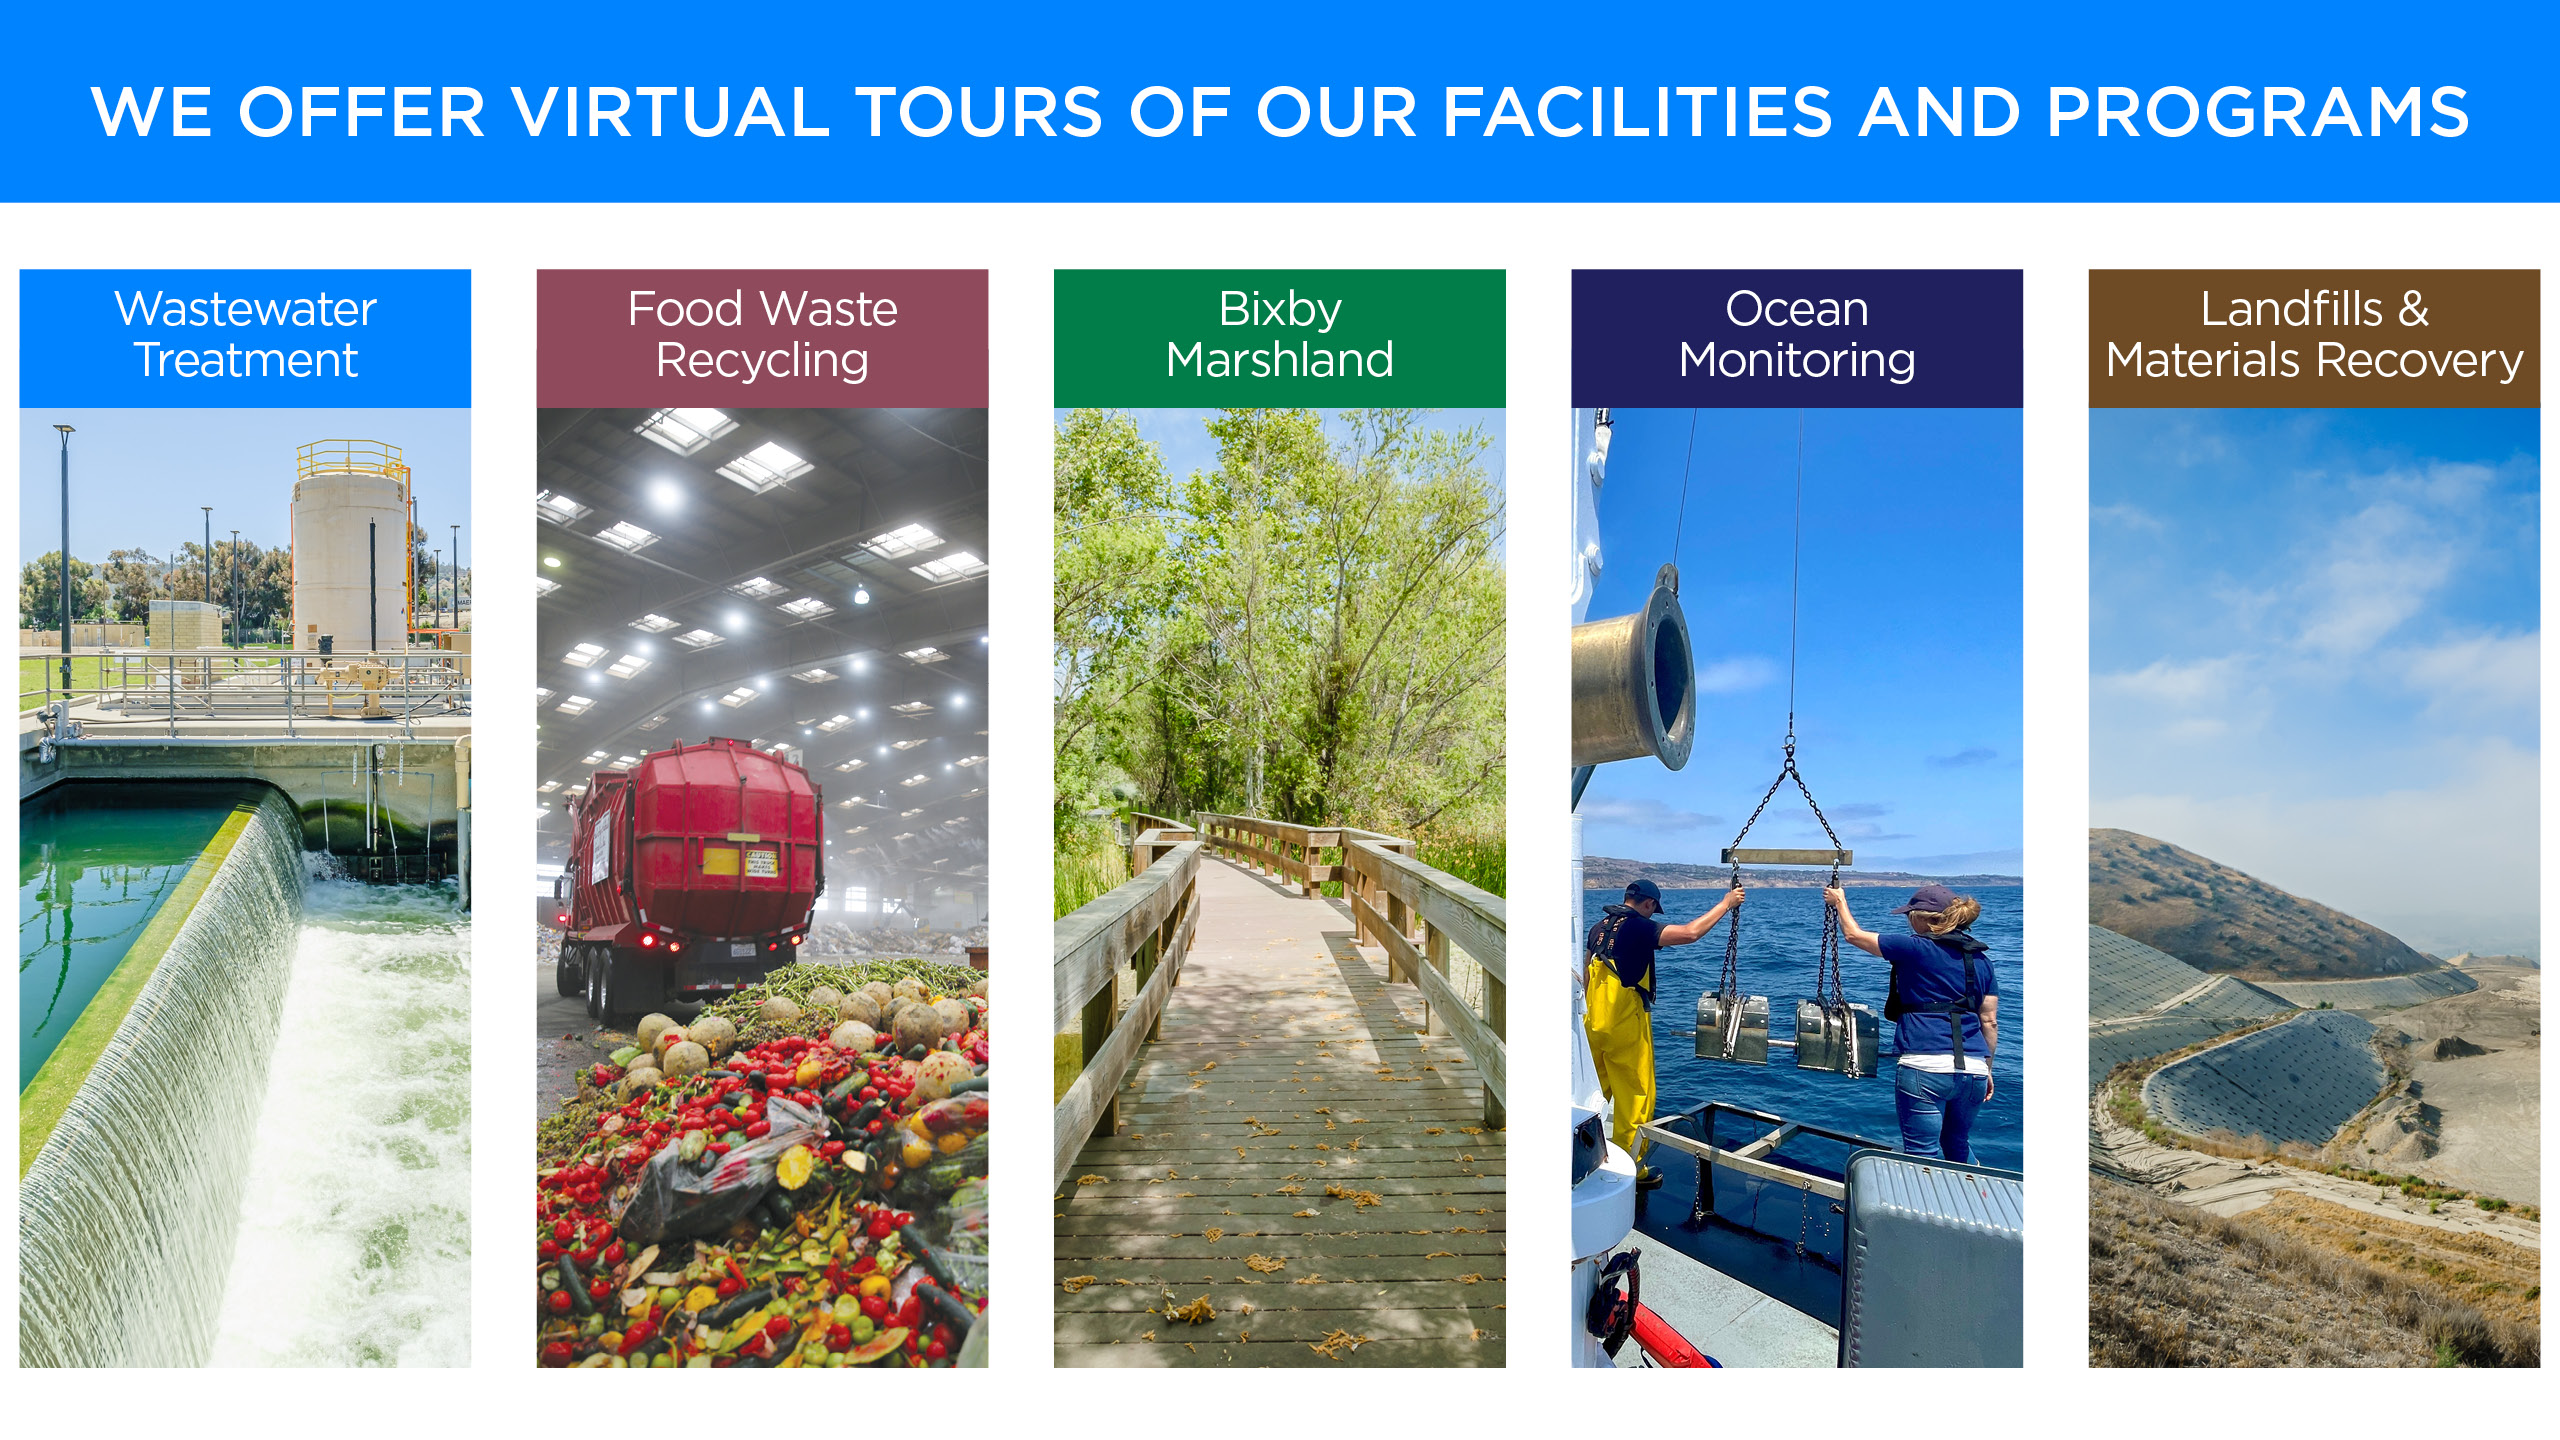 We offer virtual tours of our facilities and programs